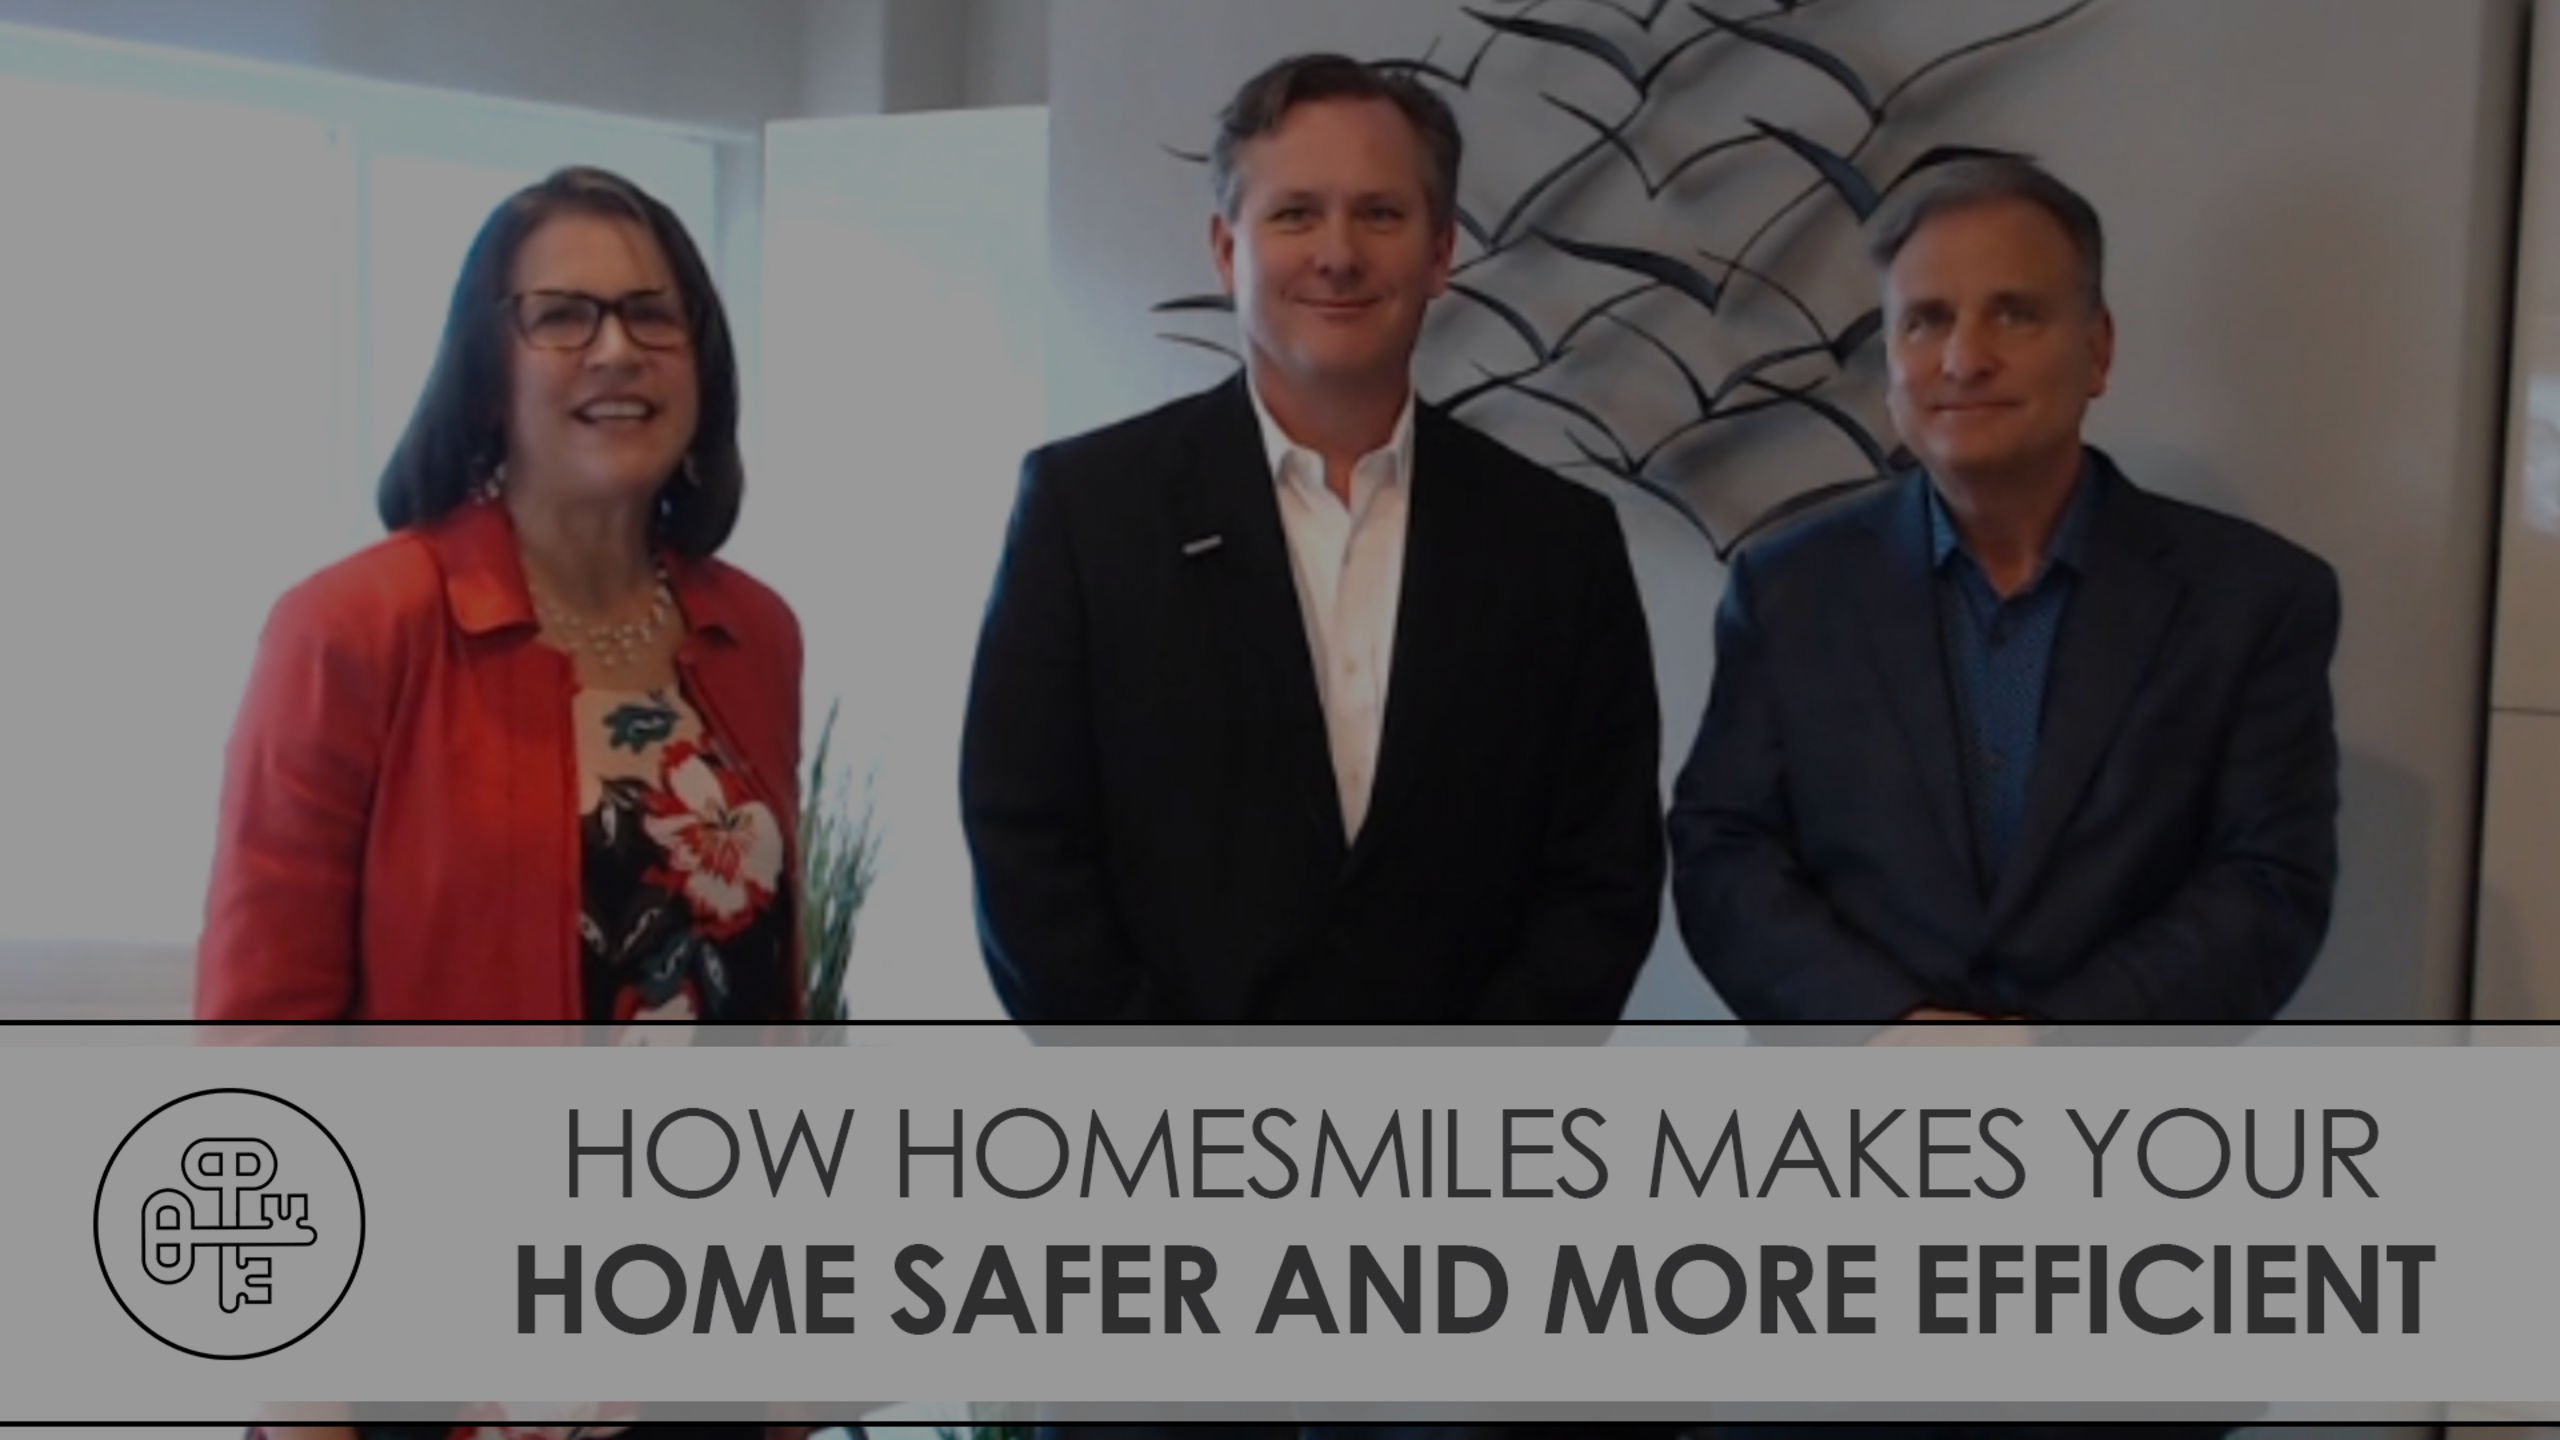 HomeSmiles Offers Home Maintenance and Safety Checks All in One